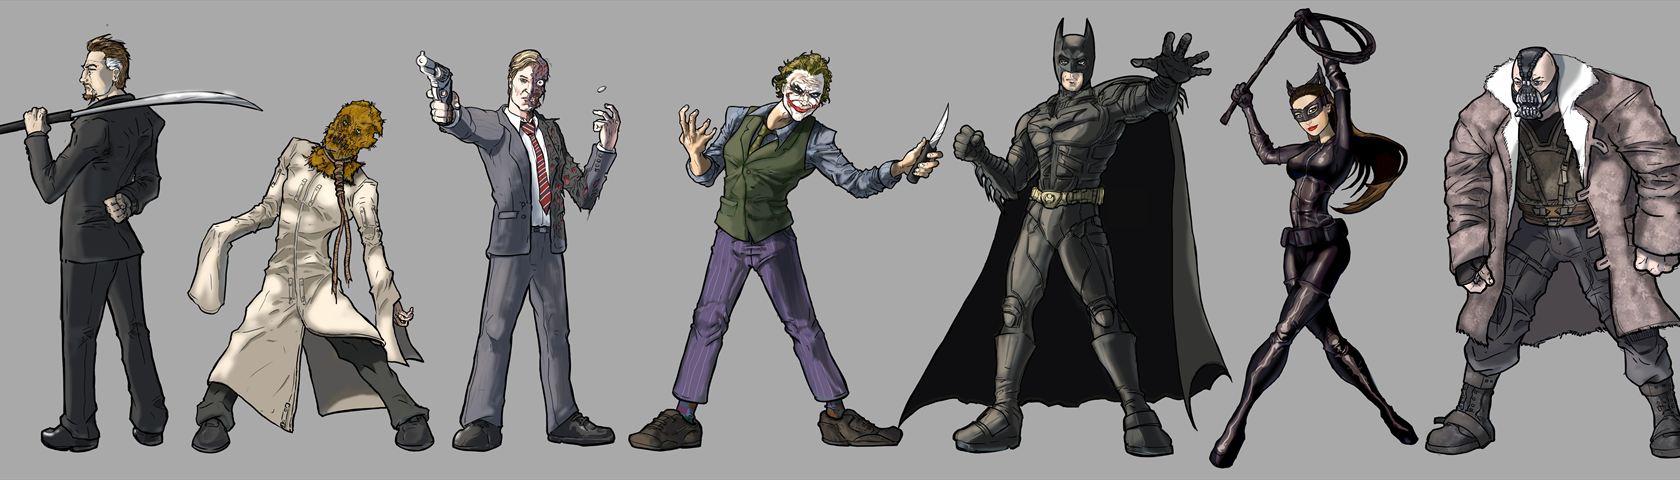 Batman and Villains • Images • WallpaperFusion by Binary Fortress Software